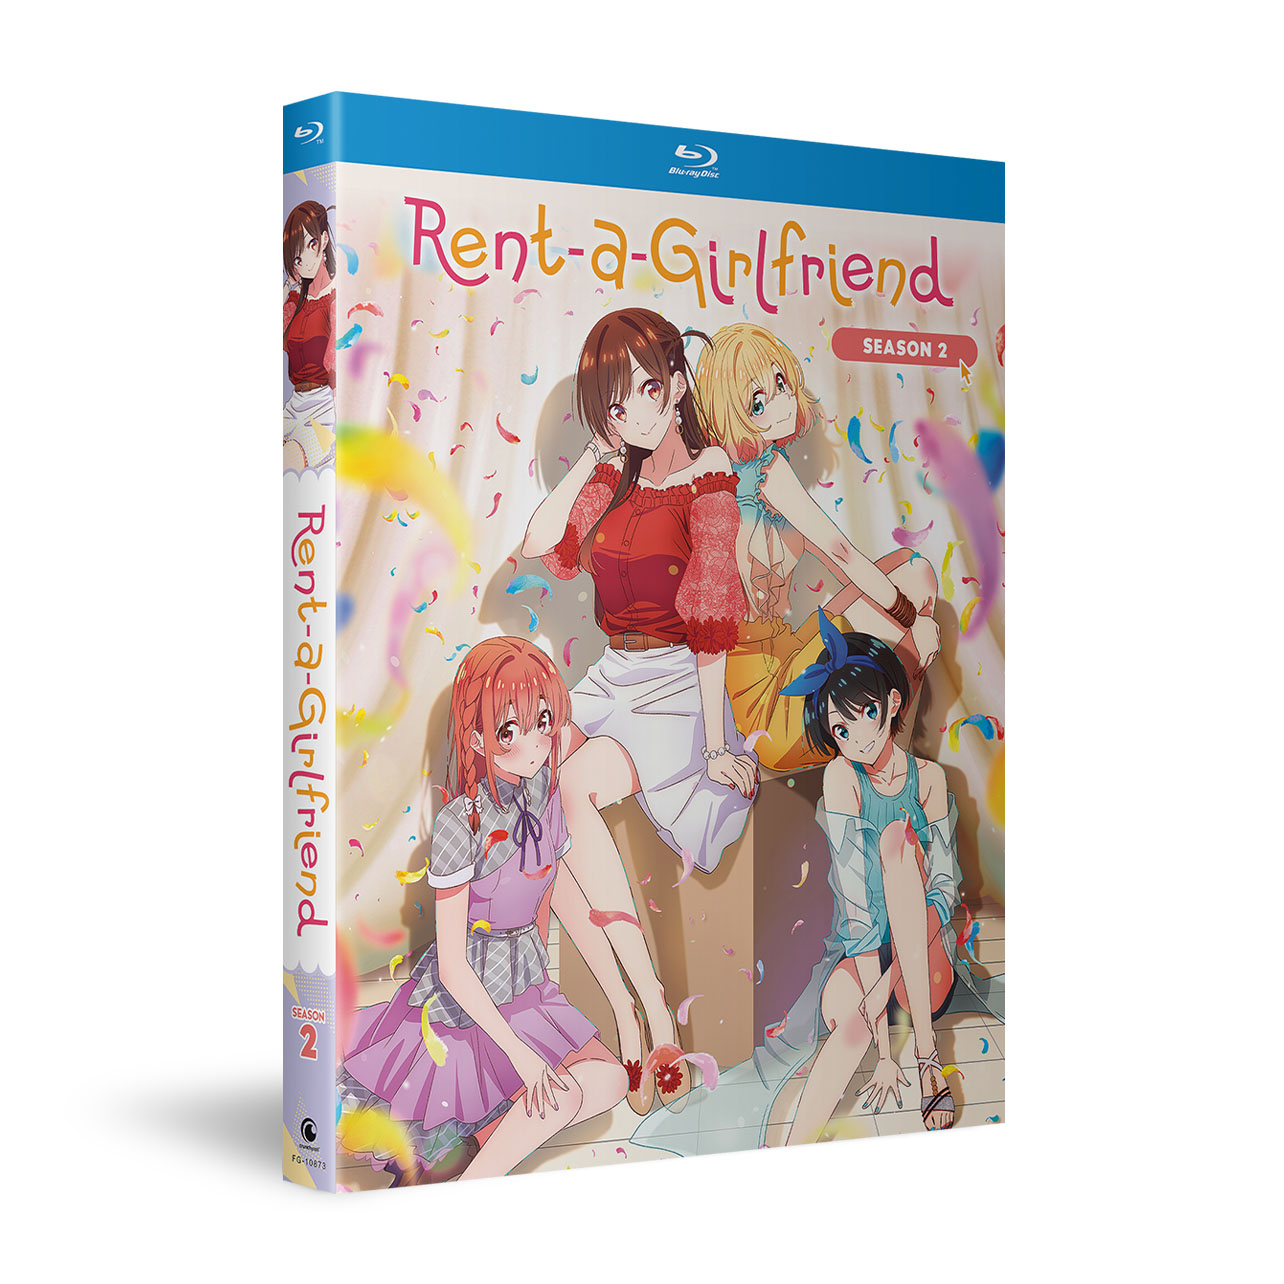 Your Best Girls Are Back in Rent-a-Girlfriend Season 2 PV - Crunchyroll News